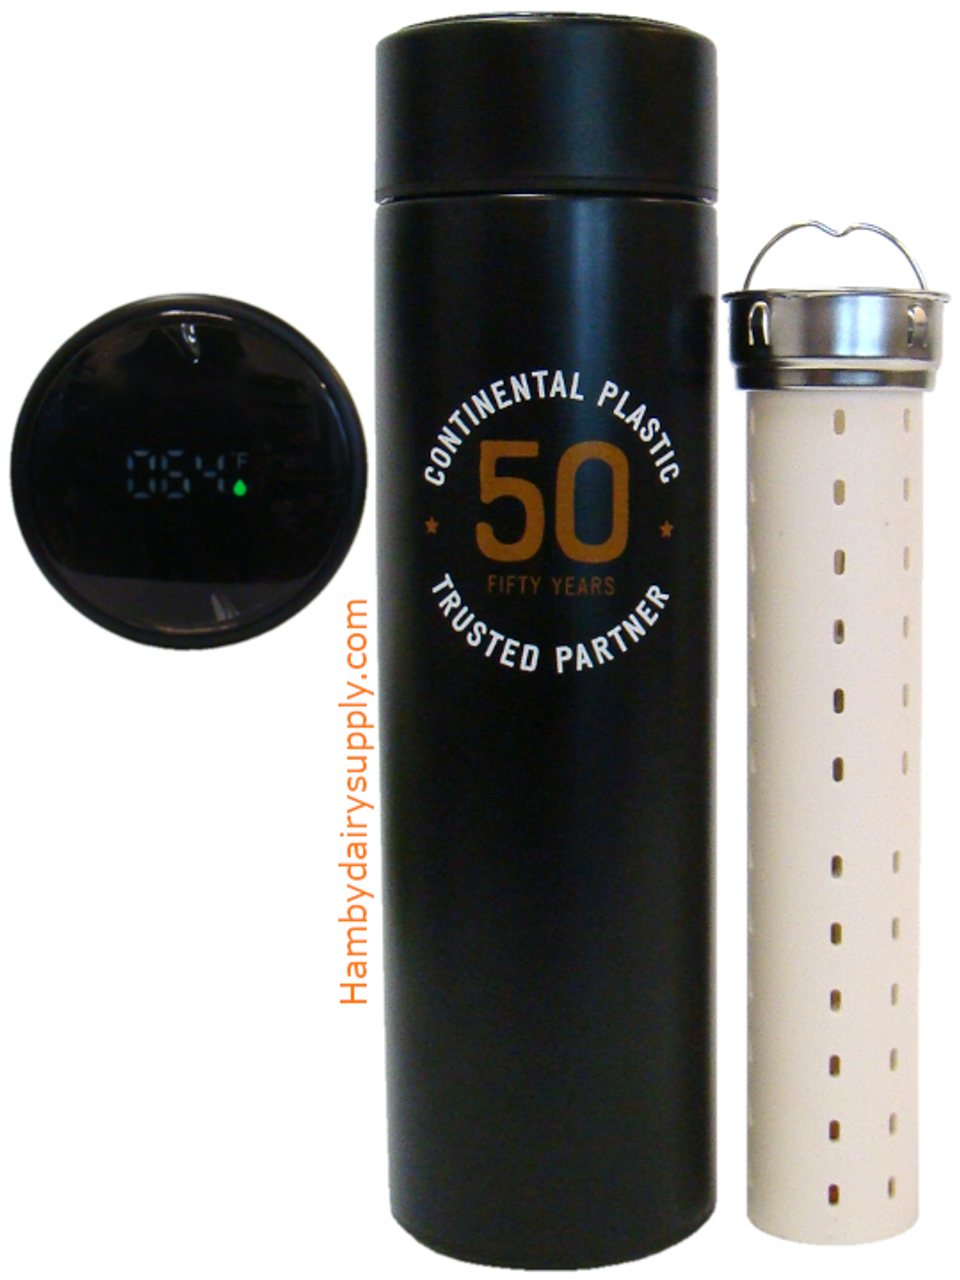 Glass Lined Thermos with Thermometer & Retriever.